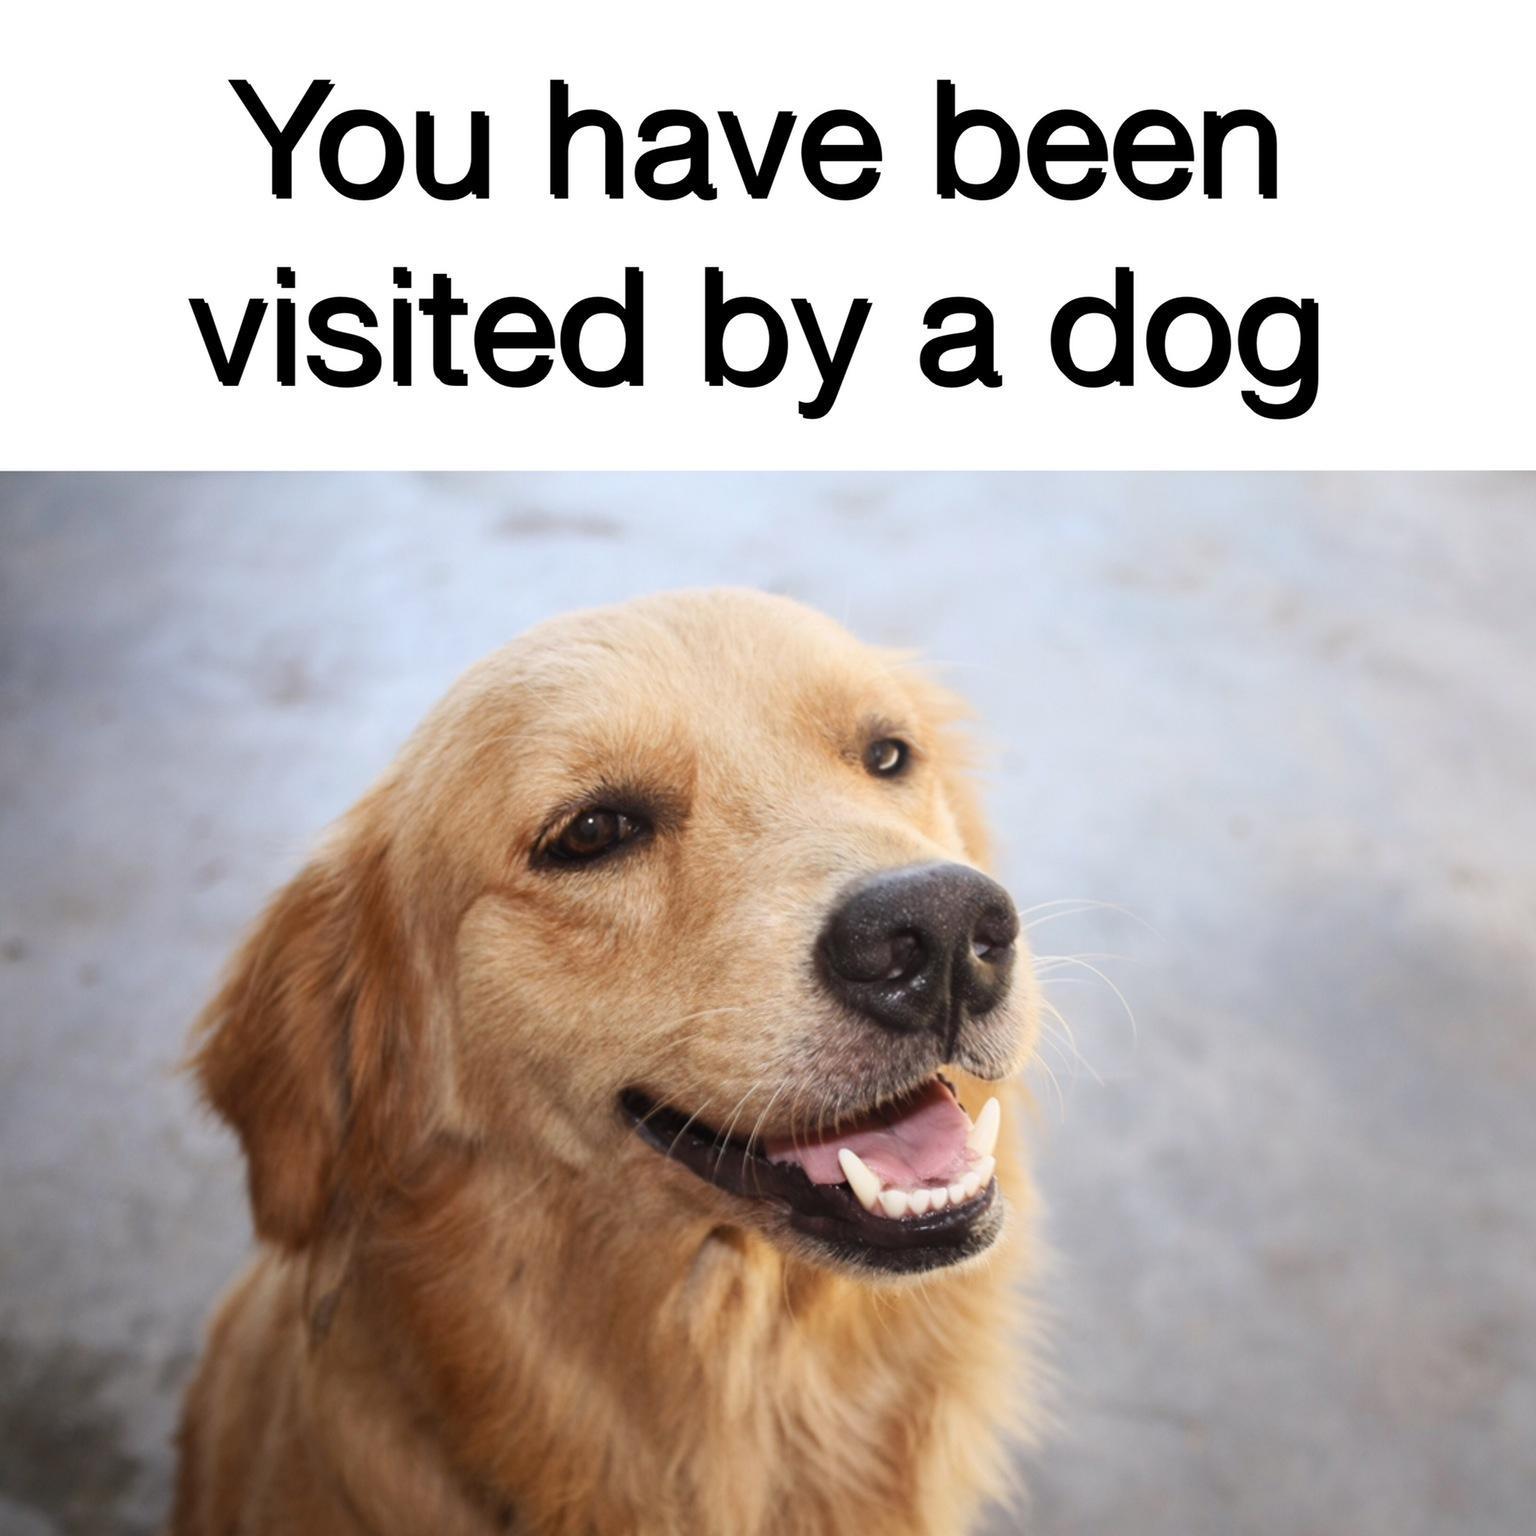 funny memes - dank memes - you have been visited by a dog - You have been visited by a dog